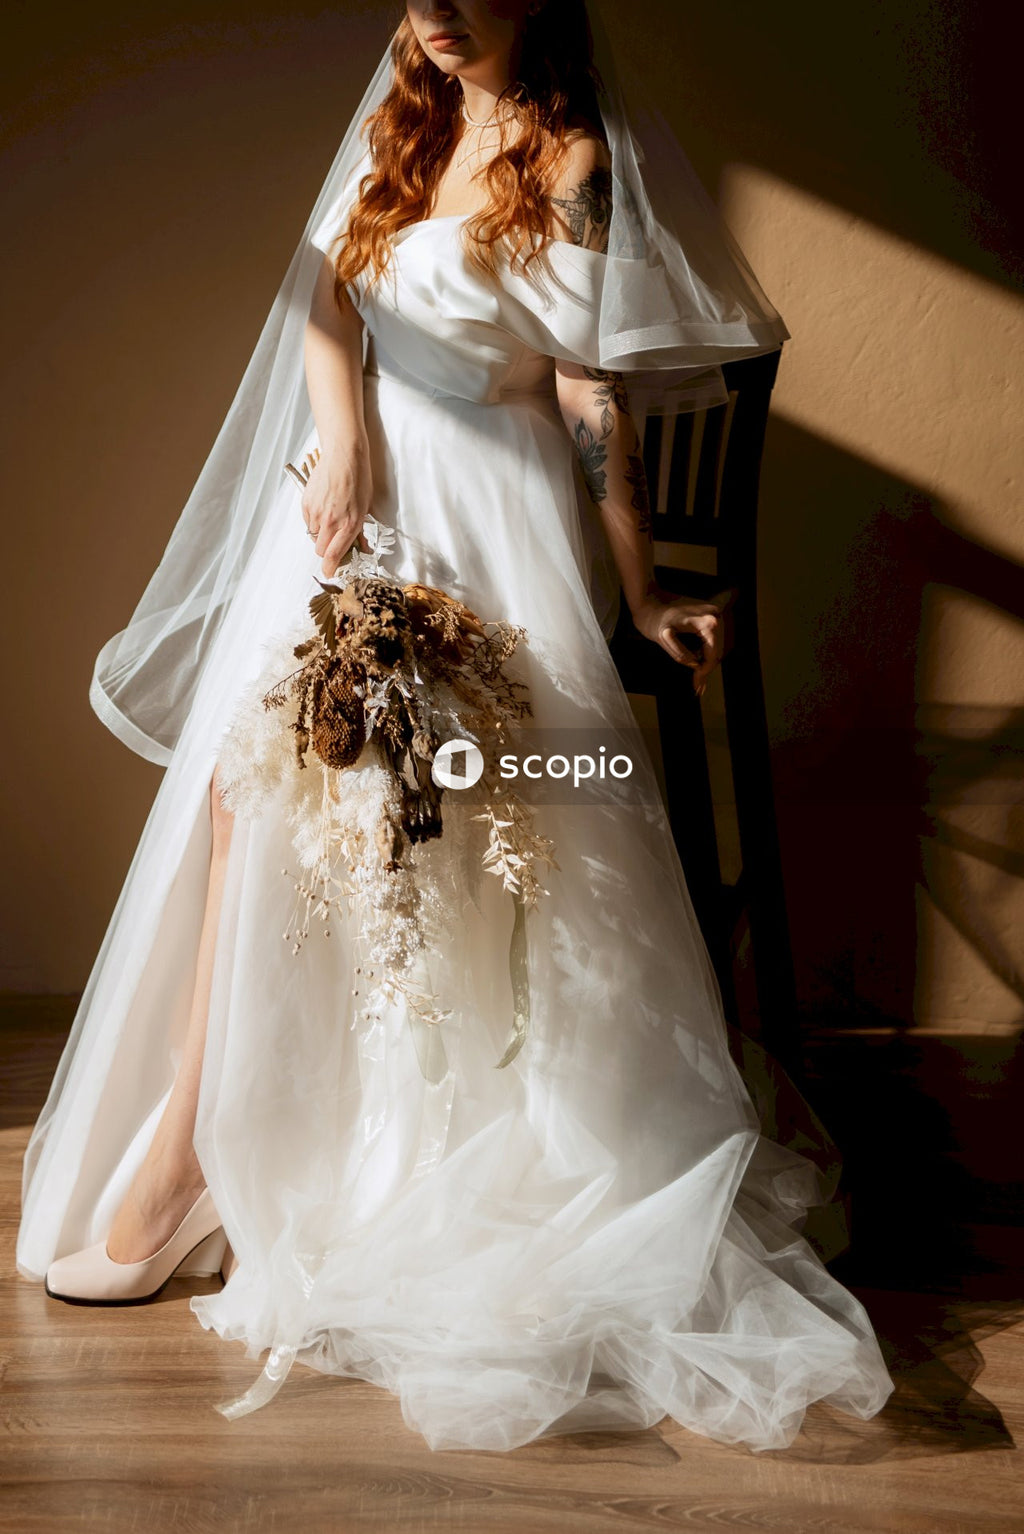 Woman in white wedding dress holding bouquet of flowers